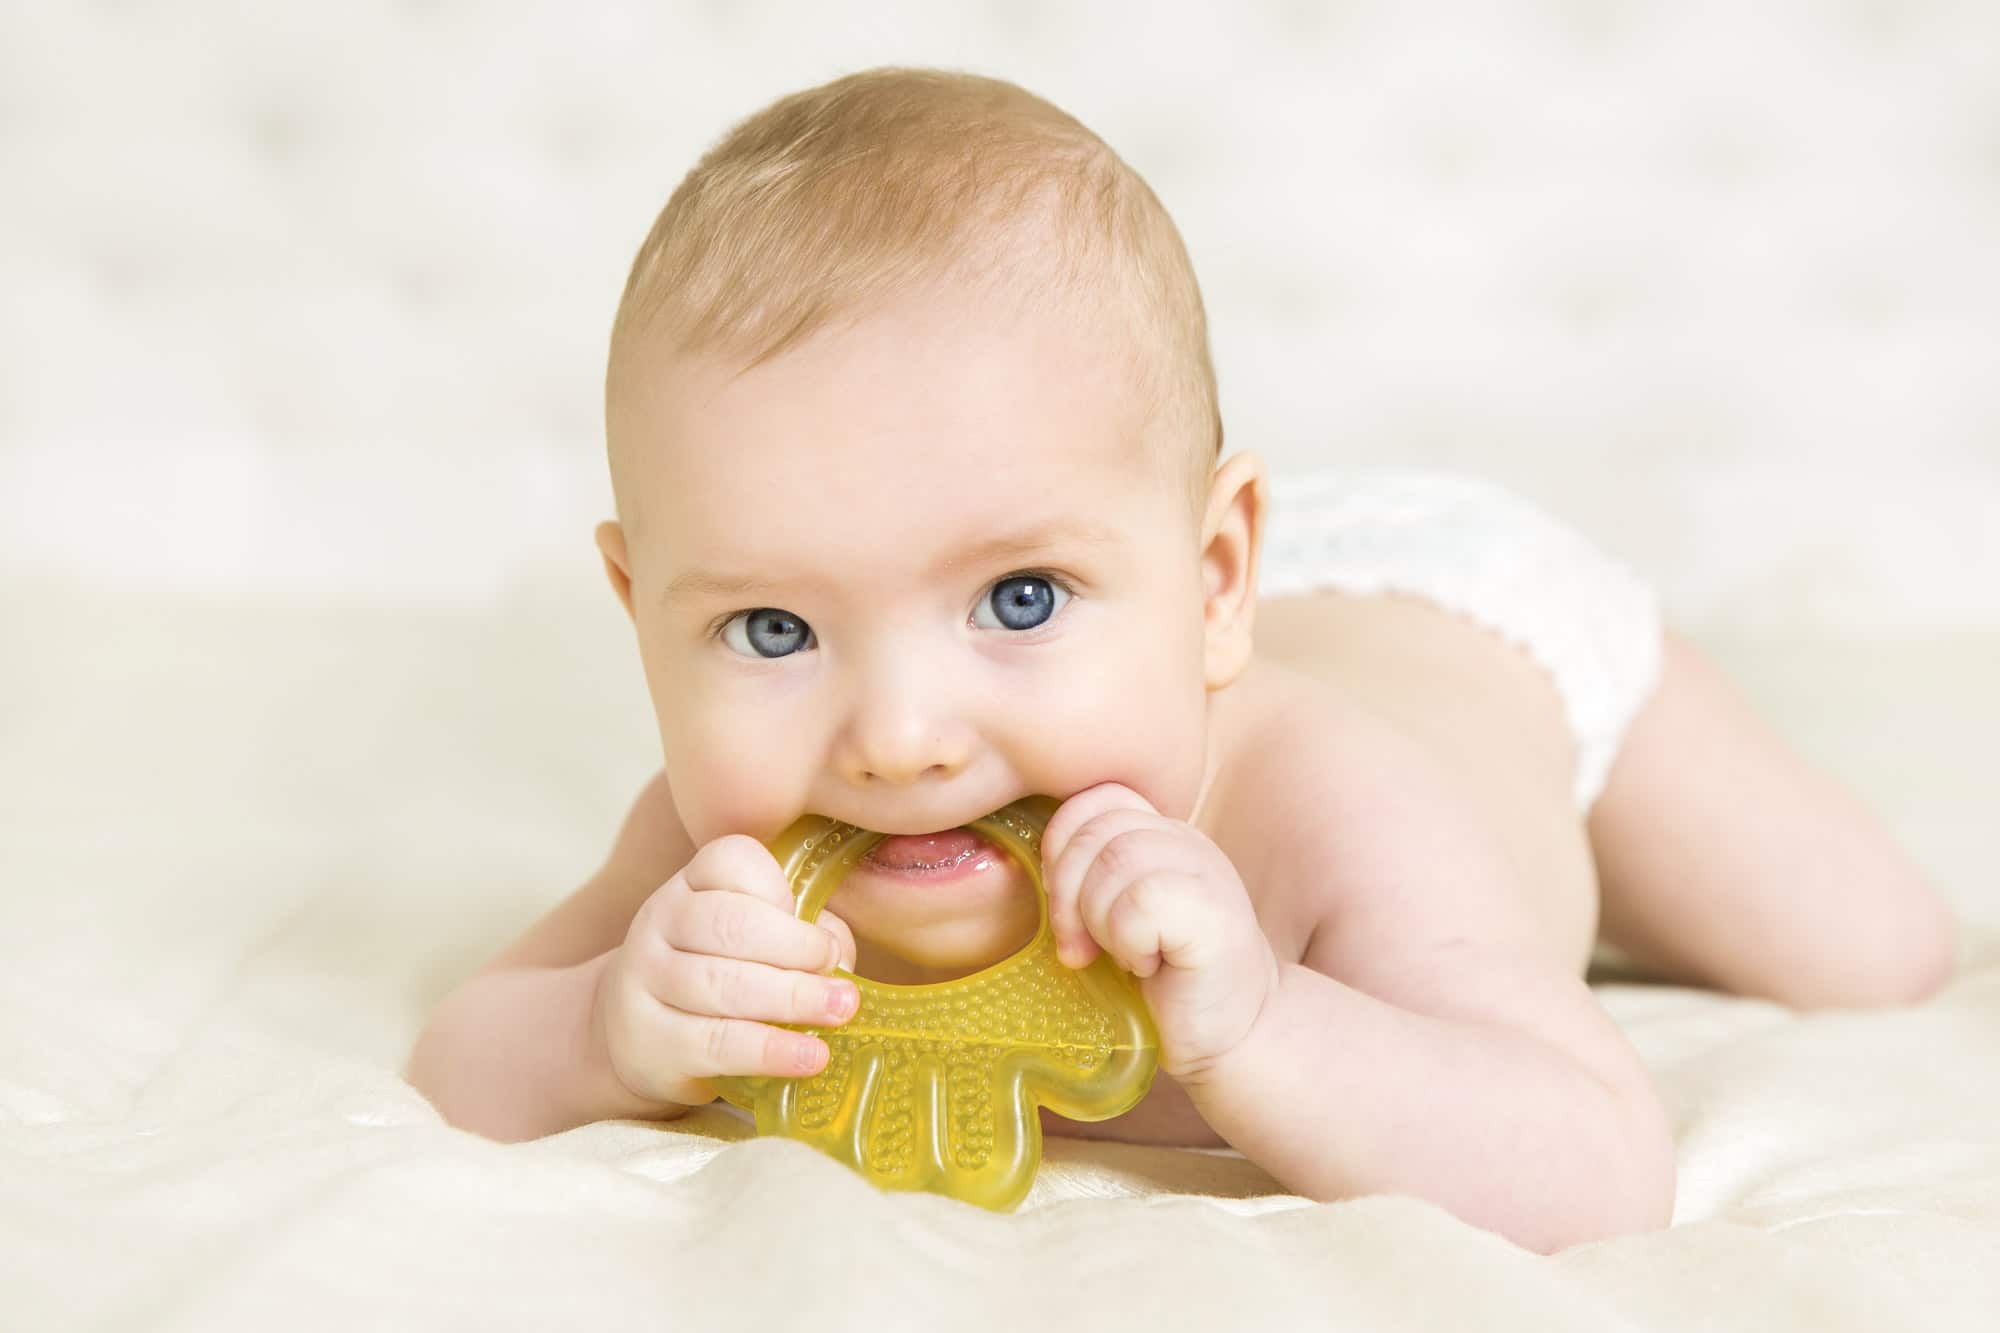 How to tell if your baby is teething and how to help ease their discomfort.